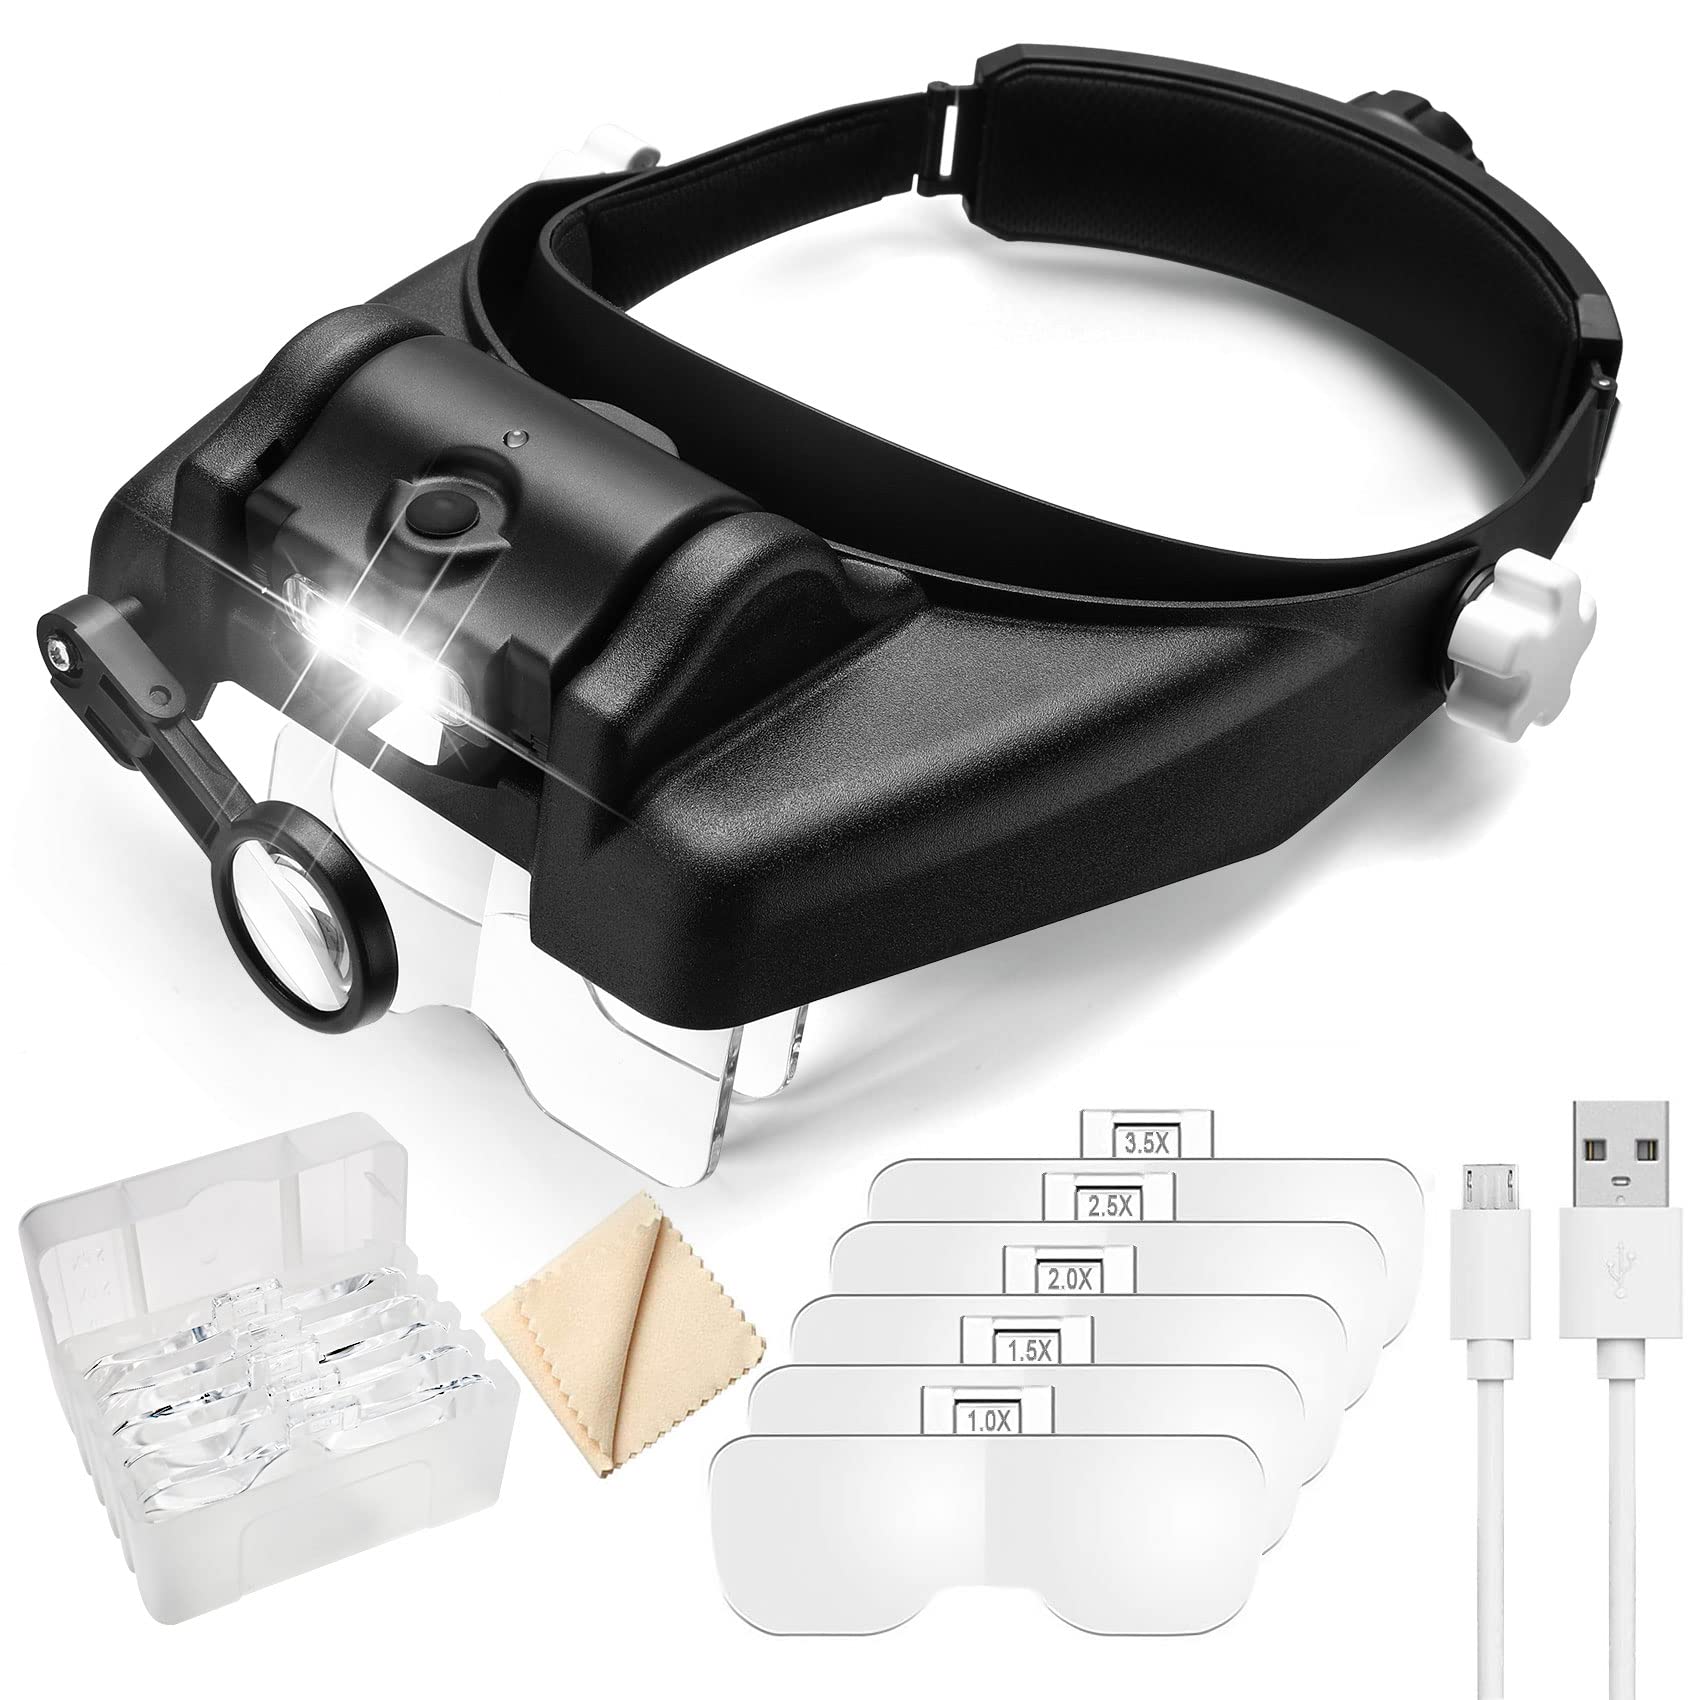 Dicfeos Headband Magnifier with LED Light, Head Mounted Magnifying Glasses  for C